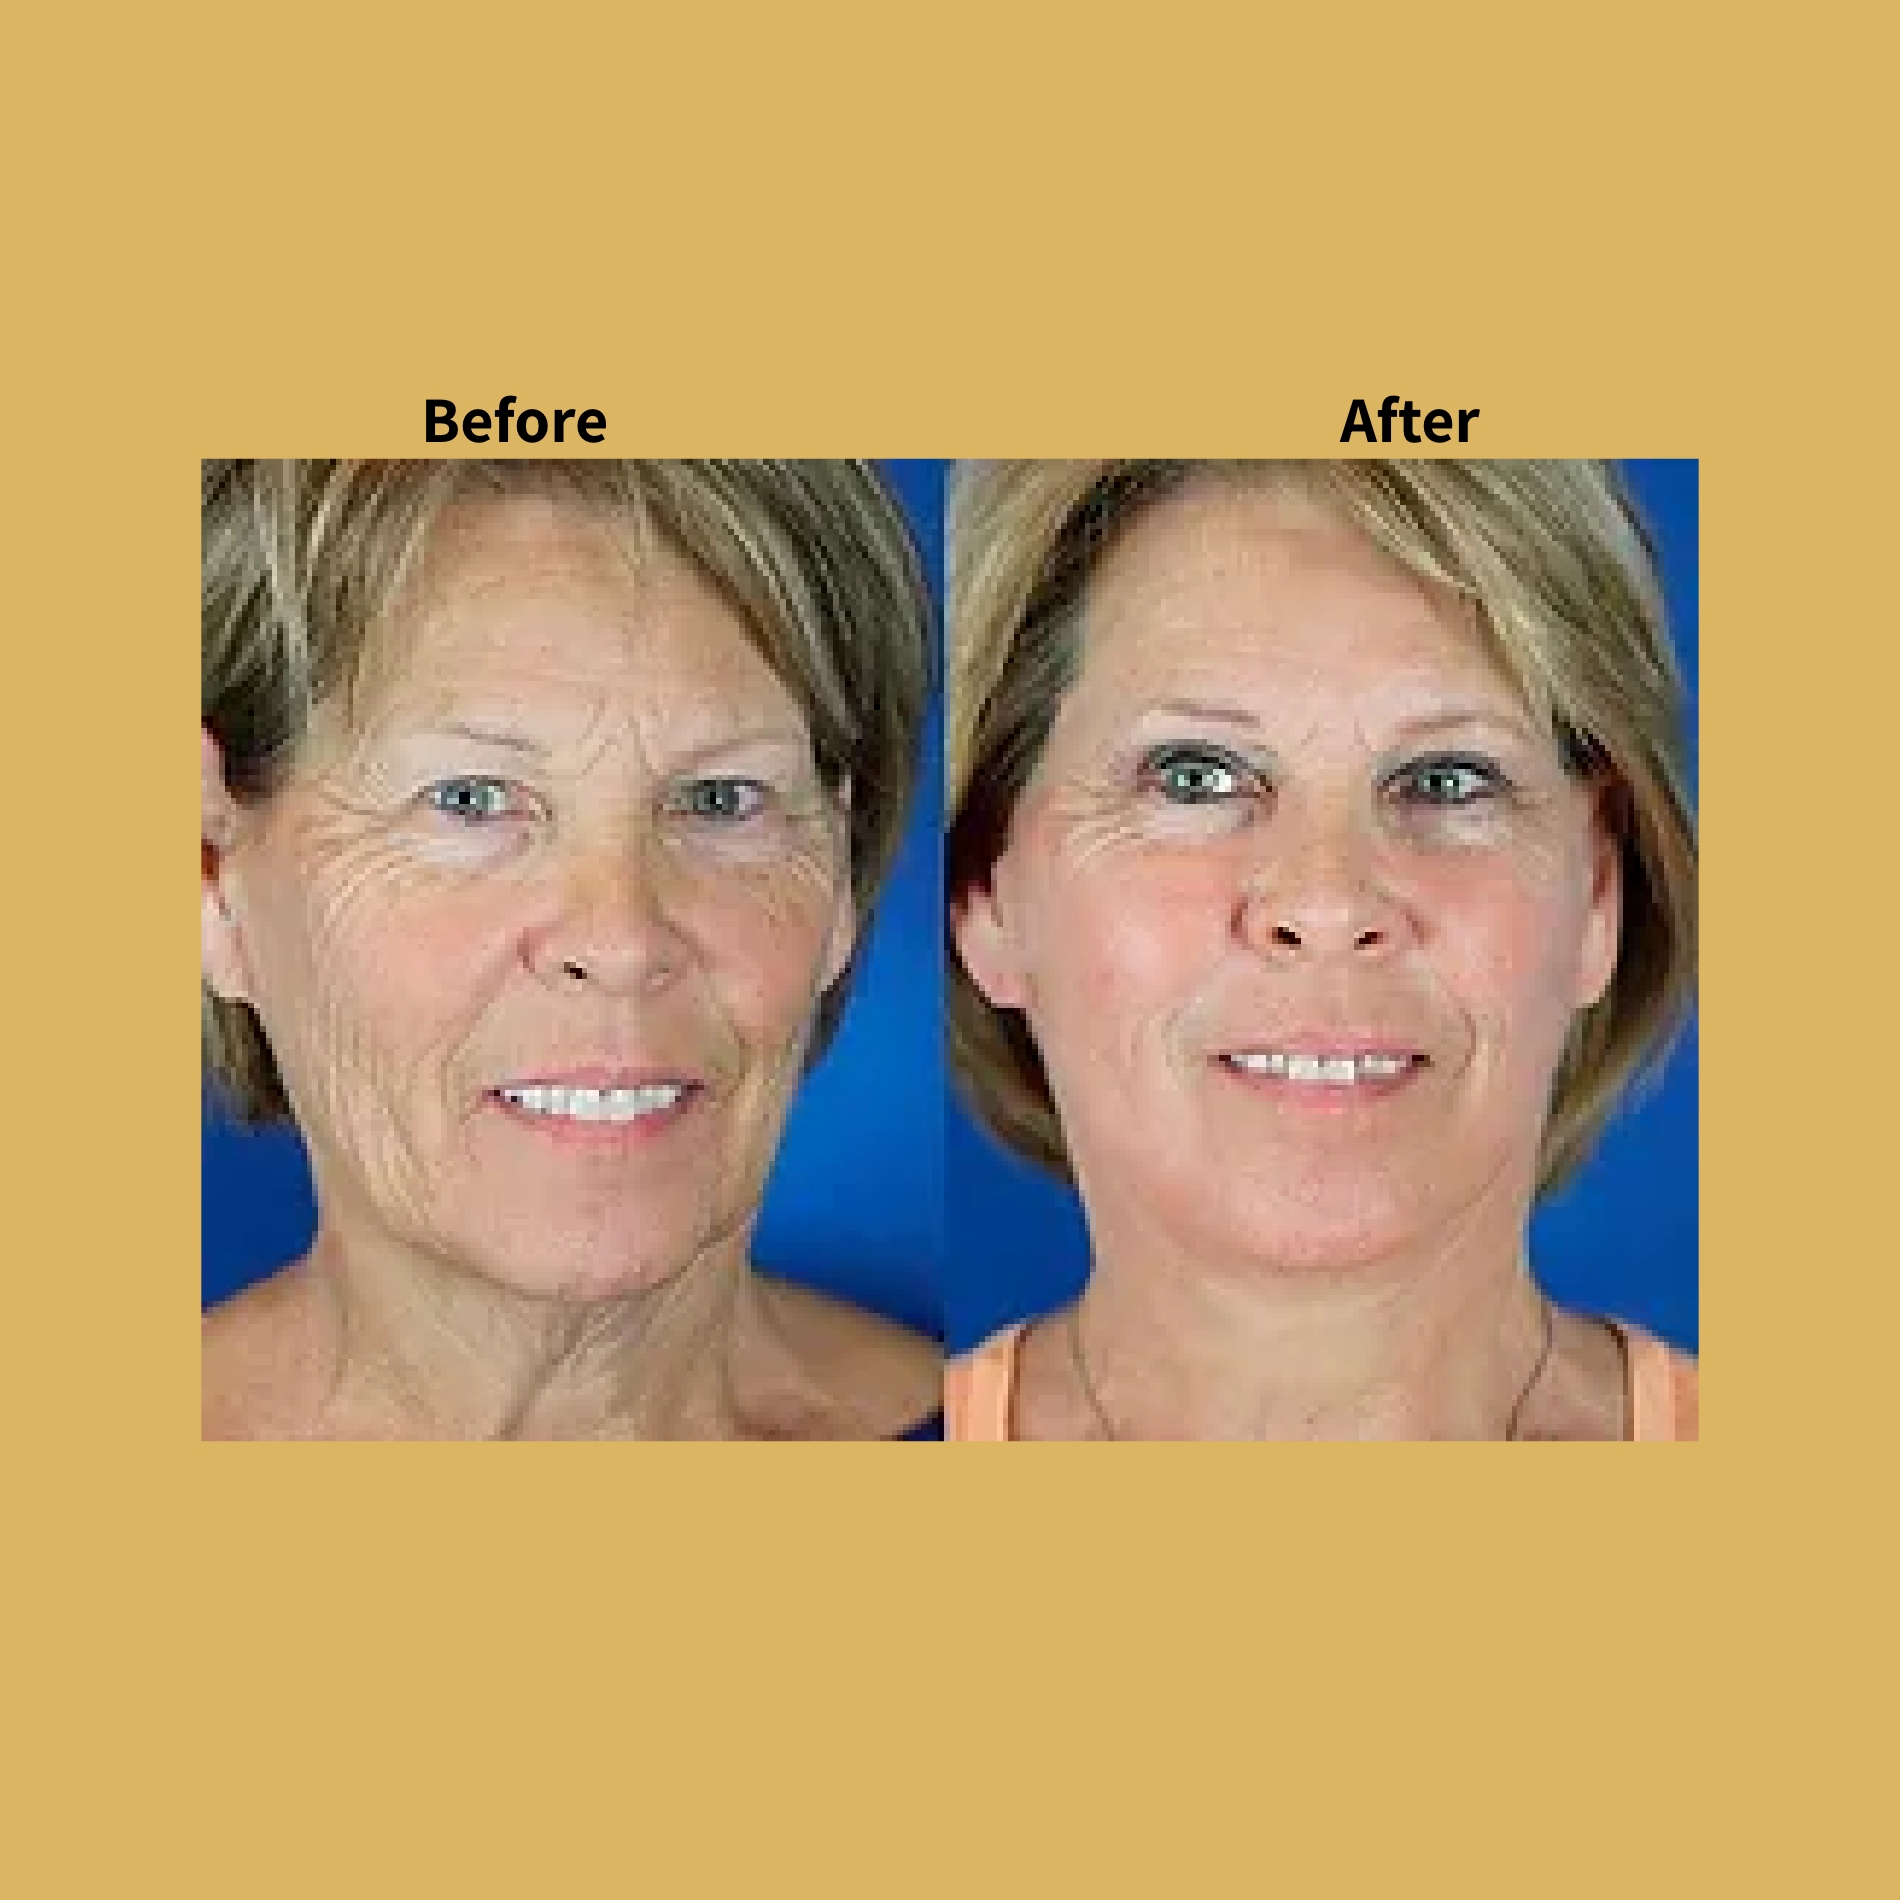 Co2 Fractional Laser Treatment Before and After Photos | Soleil Medical & Beauty Spa in Portland, OR